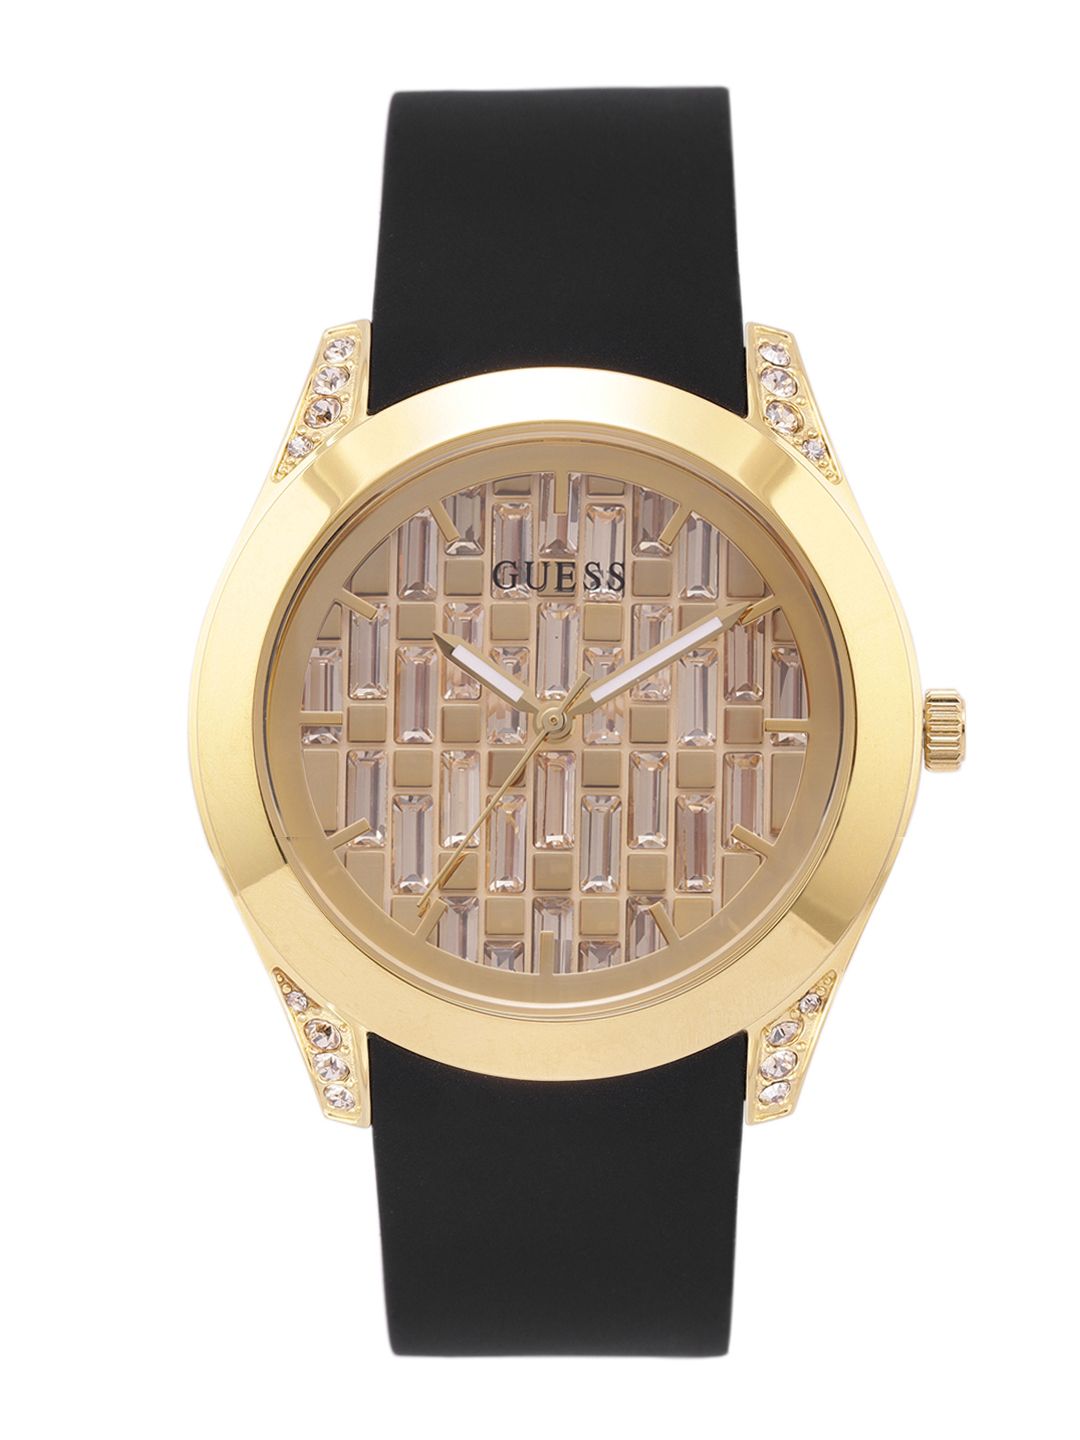 GUESS Women Gold-Toned Embellished Analogue Watch GW0109L1 Price in India